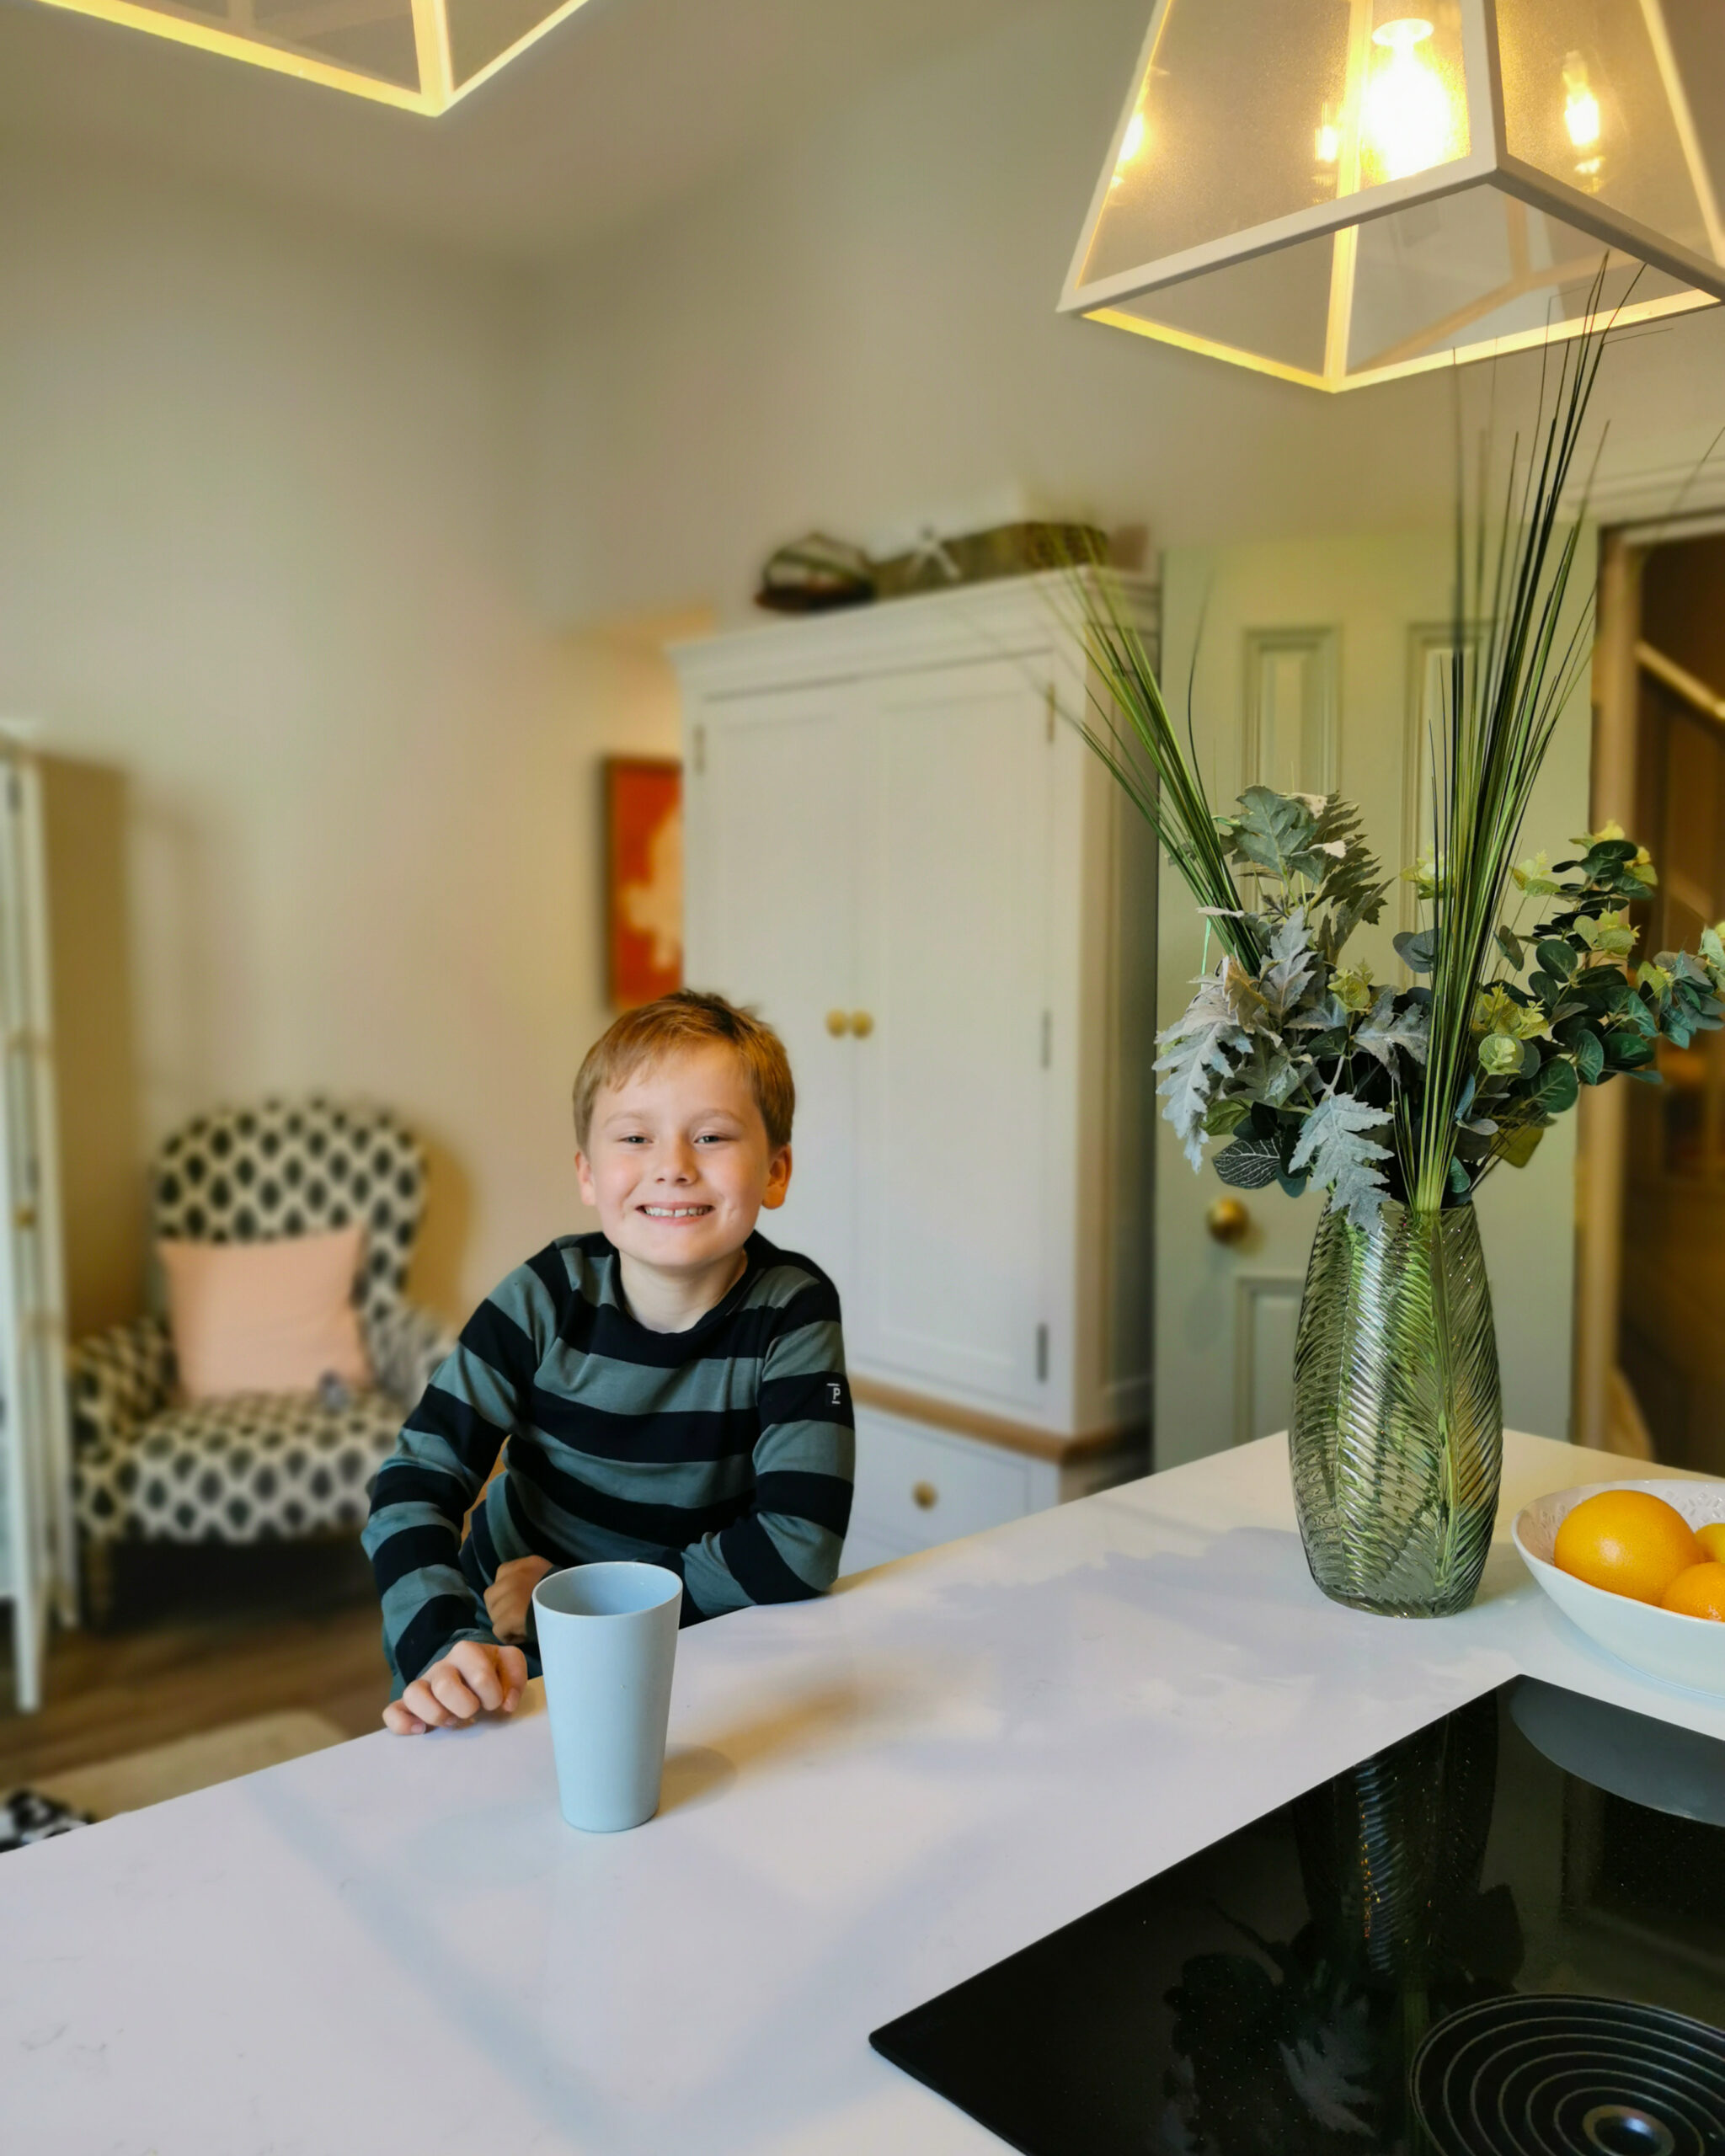 The Shell House In Bournemouth, the Shell house, Self-Catering house, Luxury Self-Catering, Family-Friendly, Seaside break, Family-Friendly, Holiday Home, the Frenchie Mummy, The Shell House Review, Family staycation